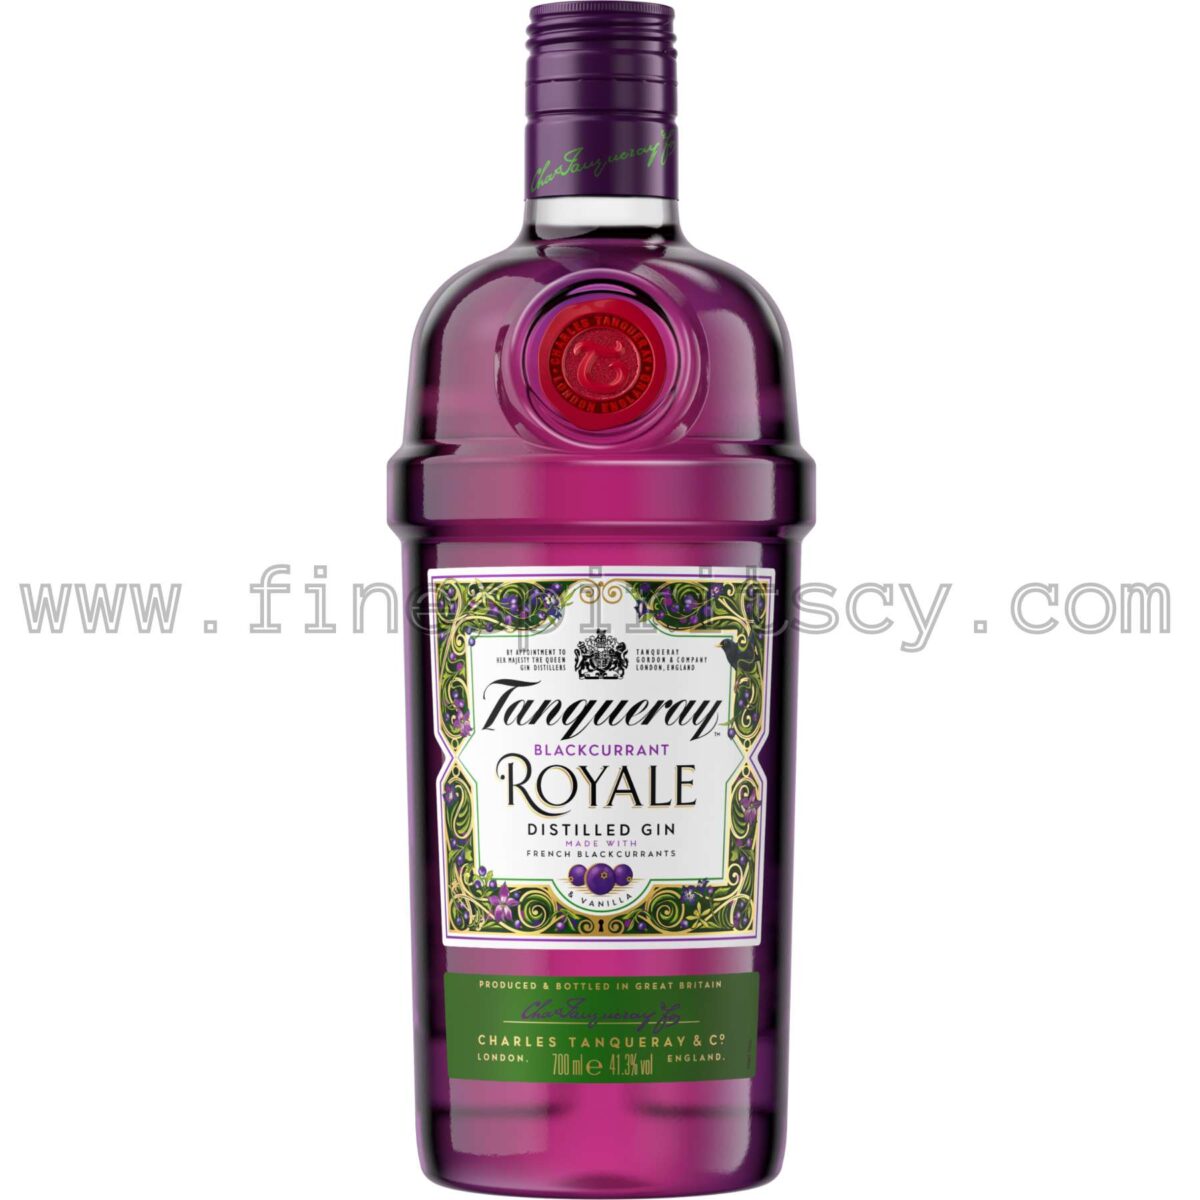 Tanqueray Blackcurrant Royale Gin Cyprus Price Online Order 700ml 70cl 0.7L Buy